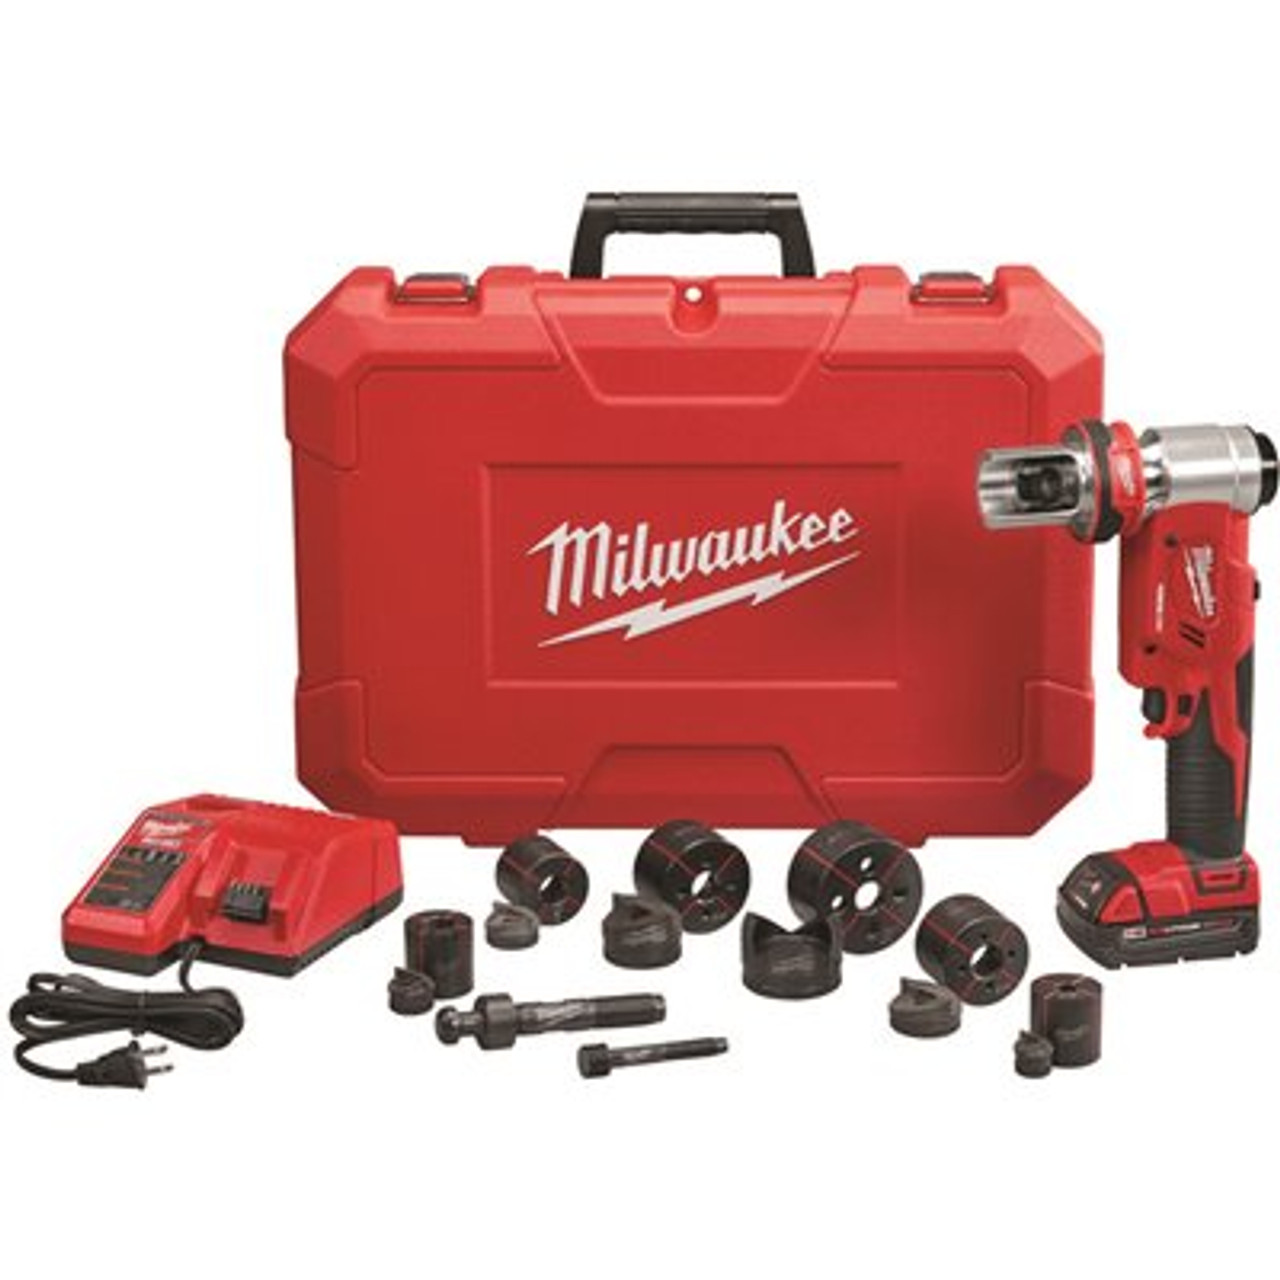 Milwaukee M18 18V Lithium-Ion Cordless FORCE LOGIC 6 Ton Knockout Tool 1/2 in. to 2 in. Kit w/(1) 2.0 Ah Battery, Die Set